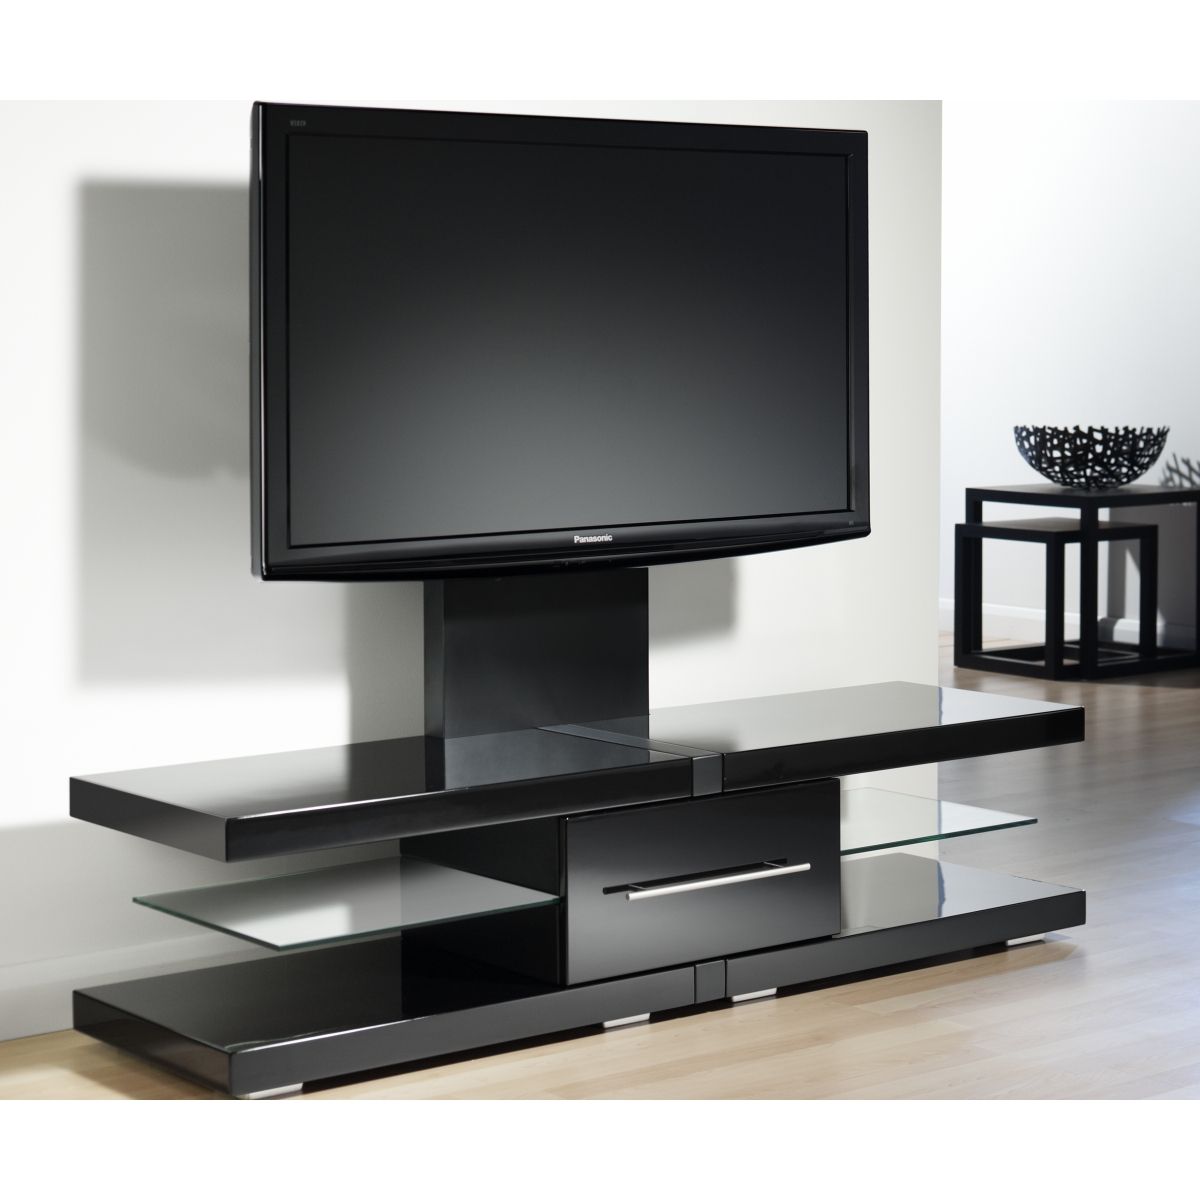 Cool Flat Screen Tv Stands With Mount – Homesfeed Inside Wall Mounted Tv Cabinets For Flat Screens With Doors (View 6 of 15)